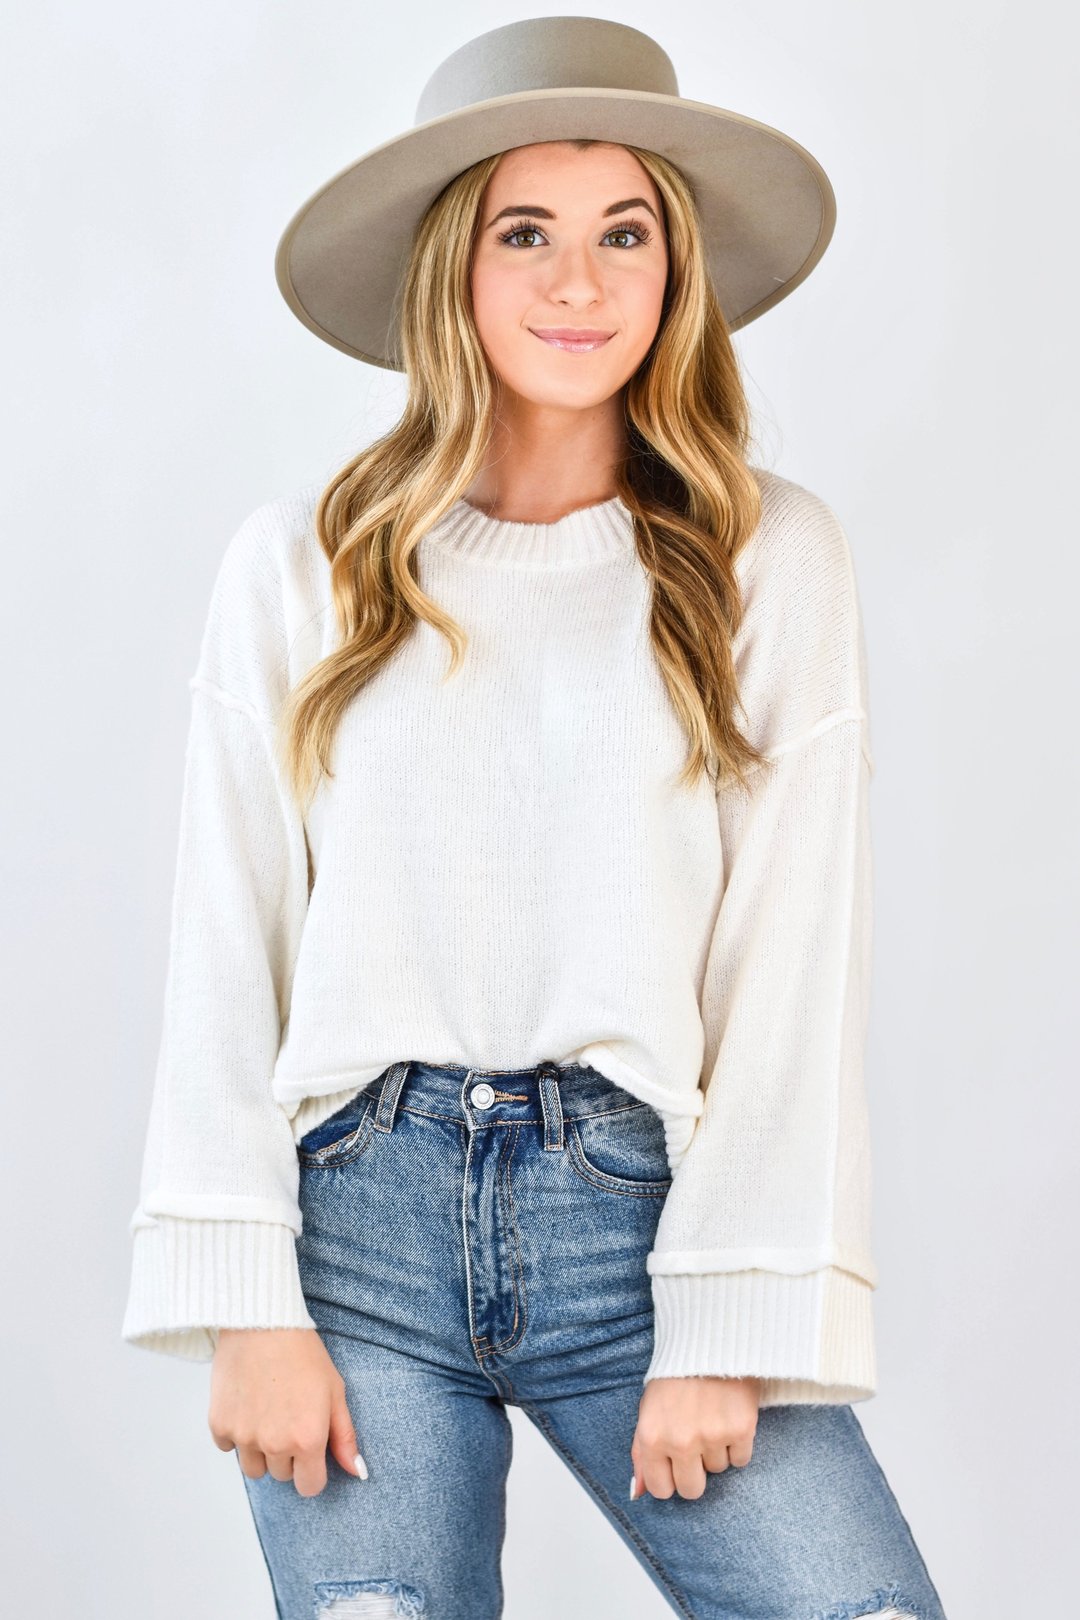 22 Cute Women’S Clothing Styles For The Holiday Season {2020}